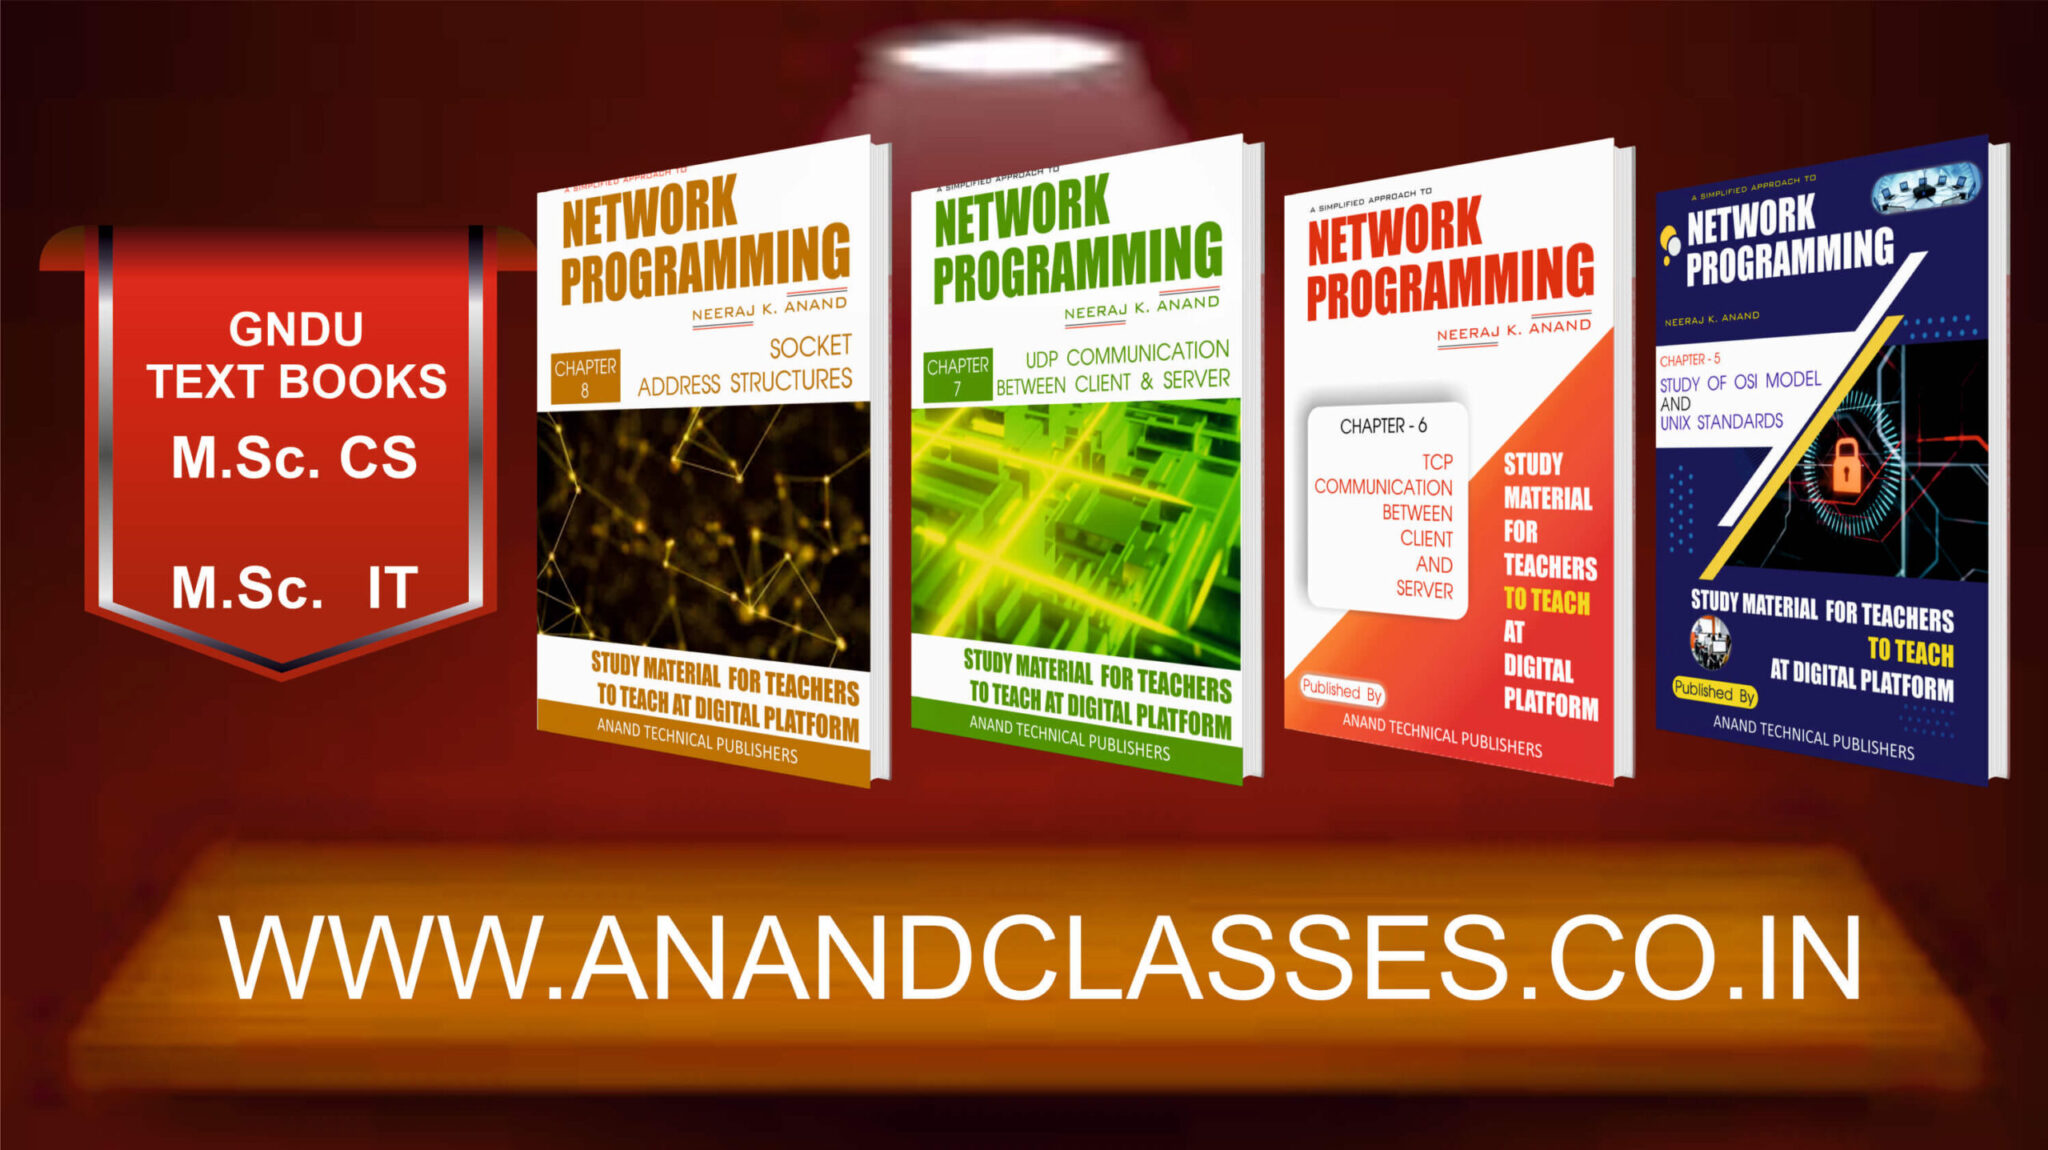 Network Programming Communication Between Client & Server|GNDU MSc Computer Science E-Book Lecture Notes Study Material Download By Anand Technical Publishers|Neeraj K Anand